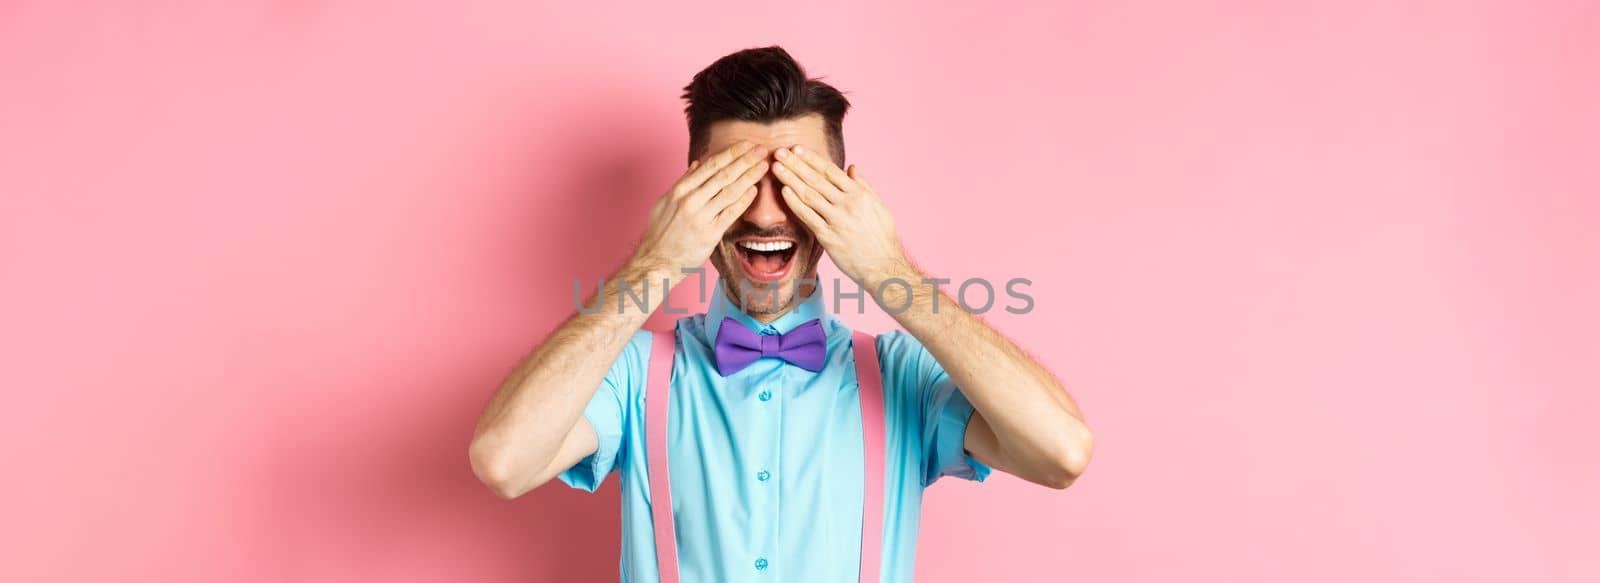 Cheerful young man celebrating, waiting for surprise with closed eyes and happy smile, standing joyful on pink background.